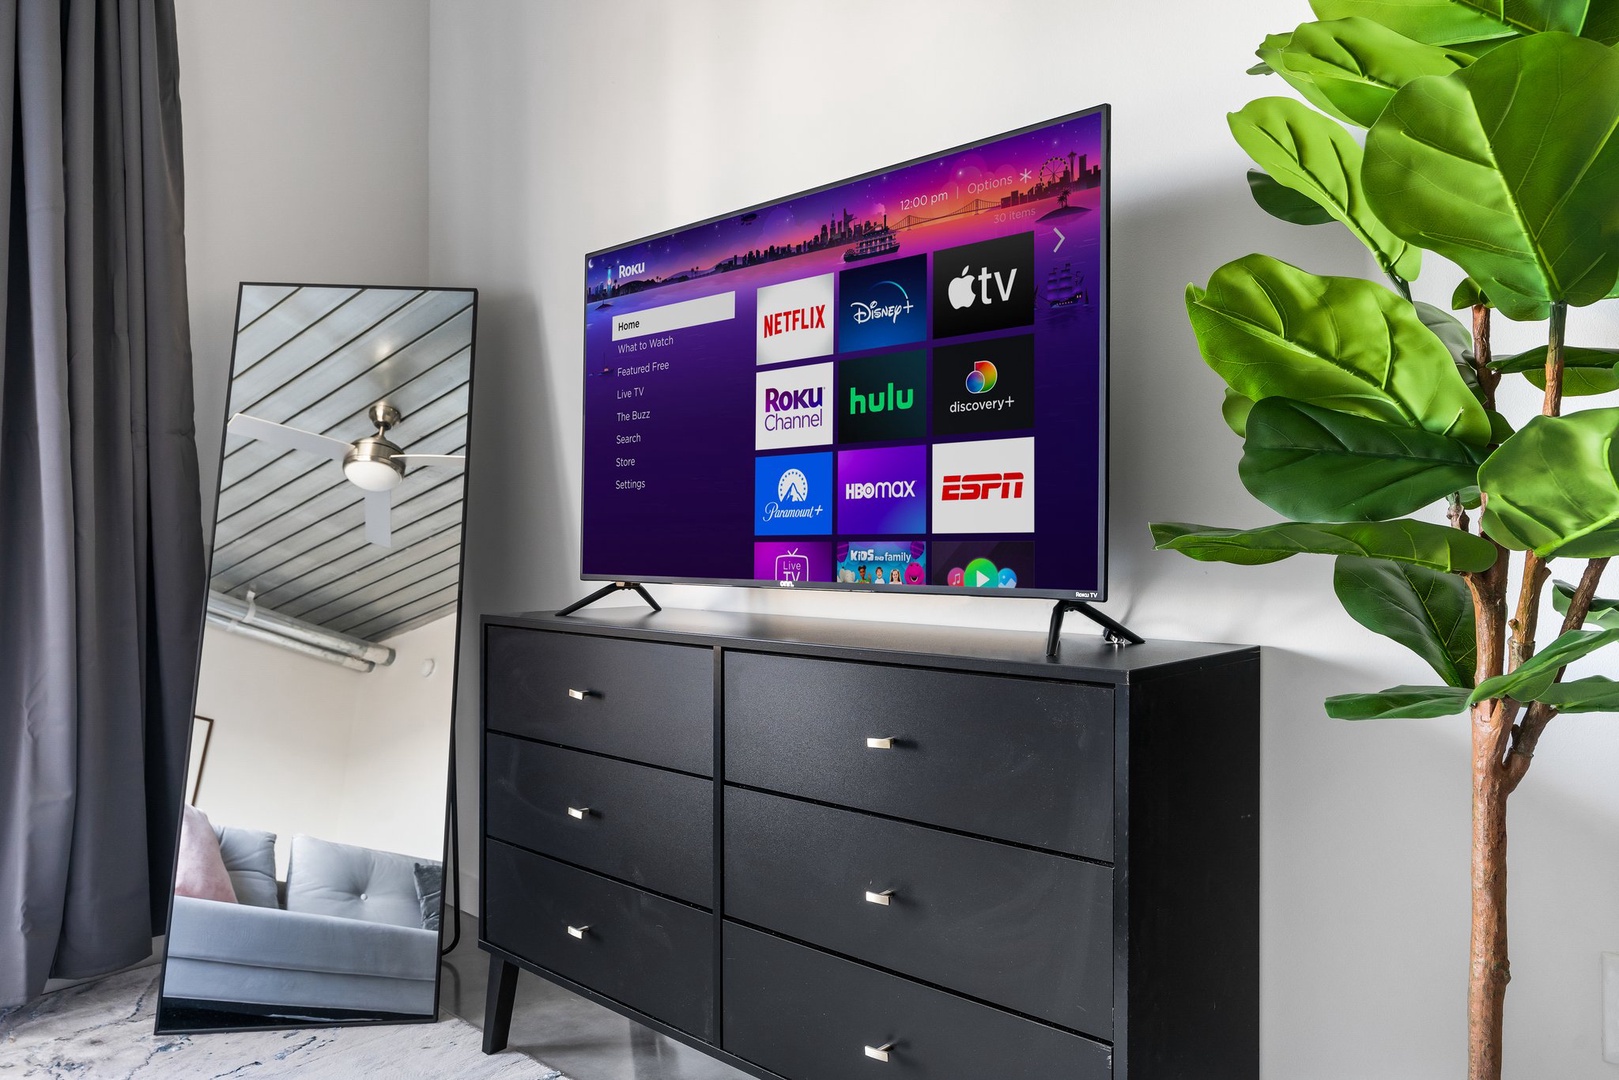 Tune in to your favorite shows with the smart TV and sound system for streaming.